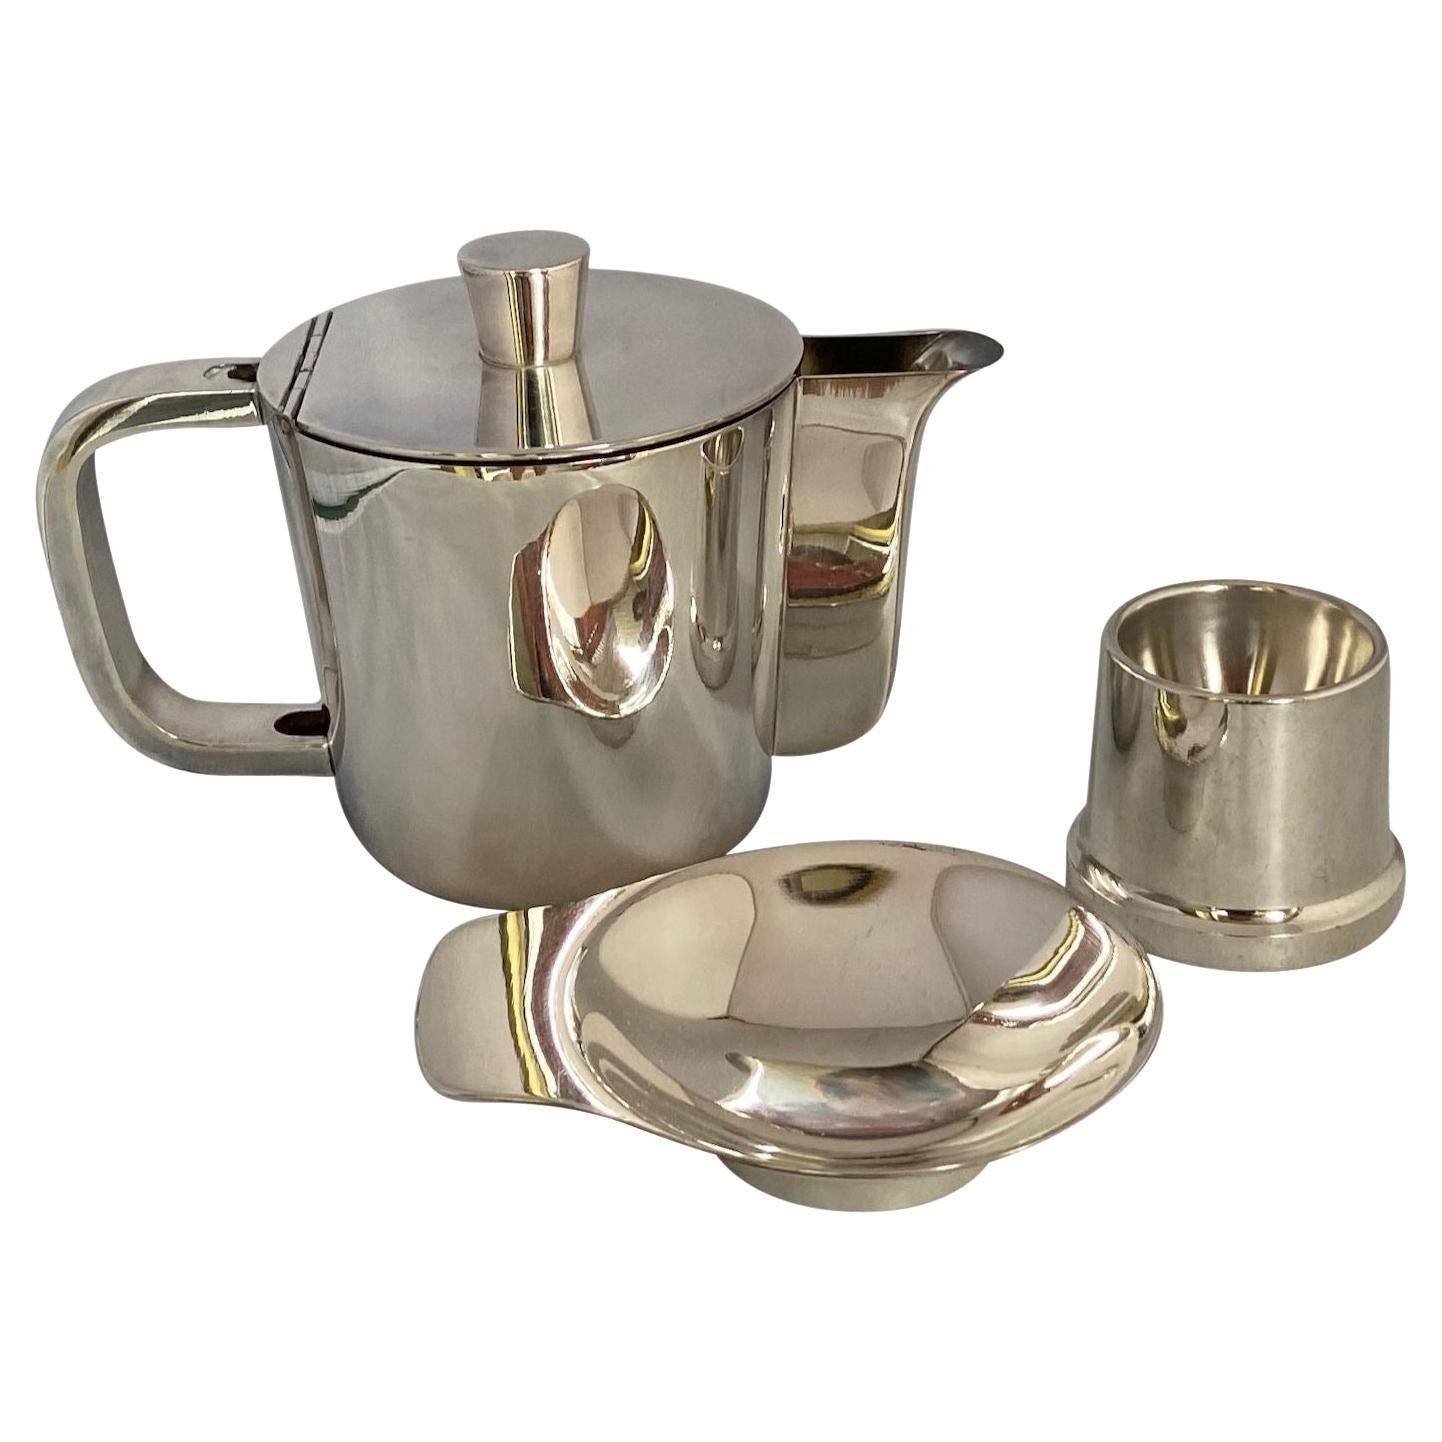 1950's Gio Ponti silver plated coffee pot, a tiny dish & egg holder by A. Krupp For Sale